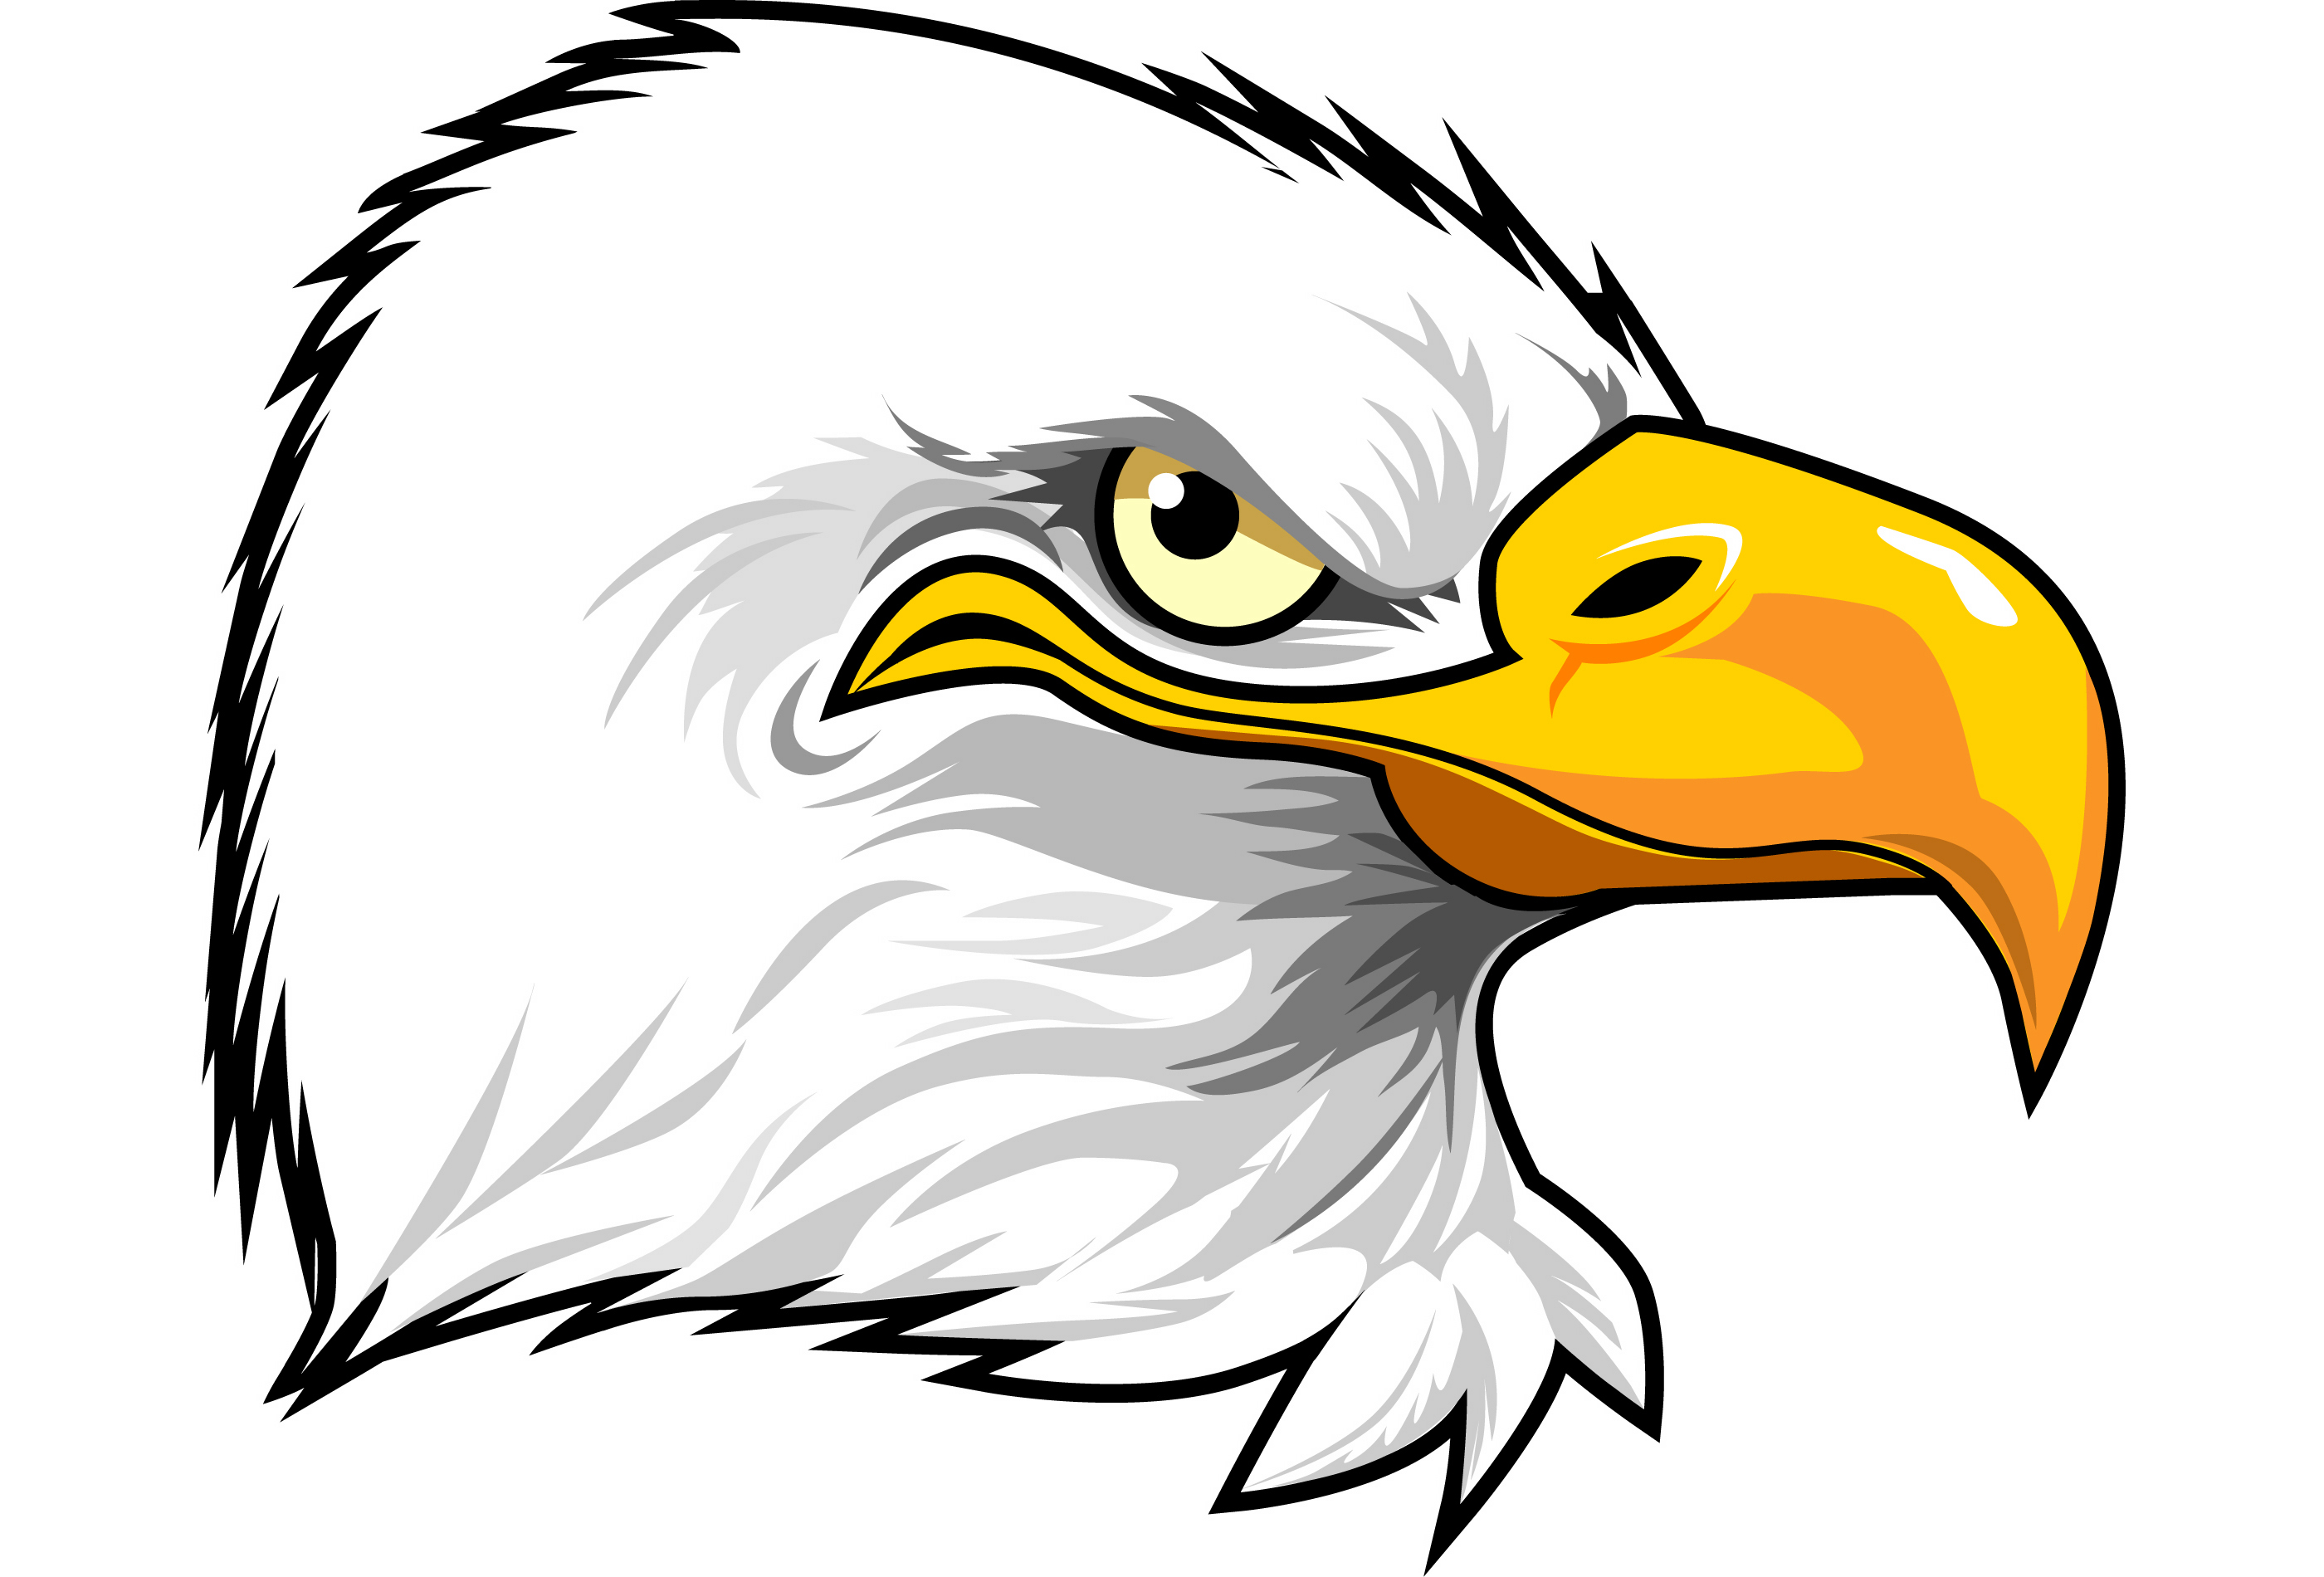 Playful and Expressive: Eagle Cartoon Pictures